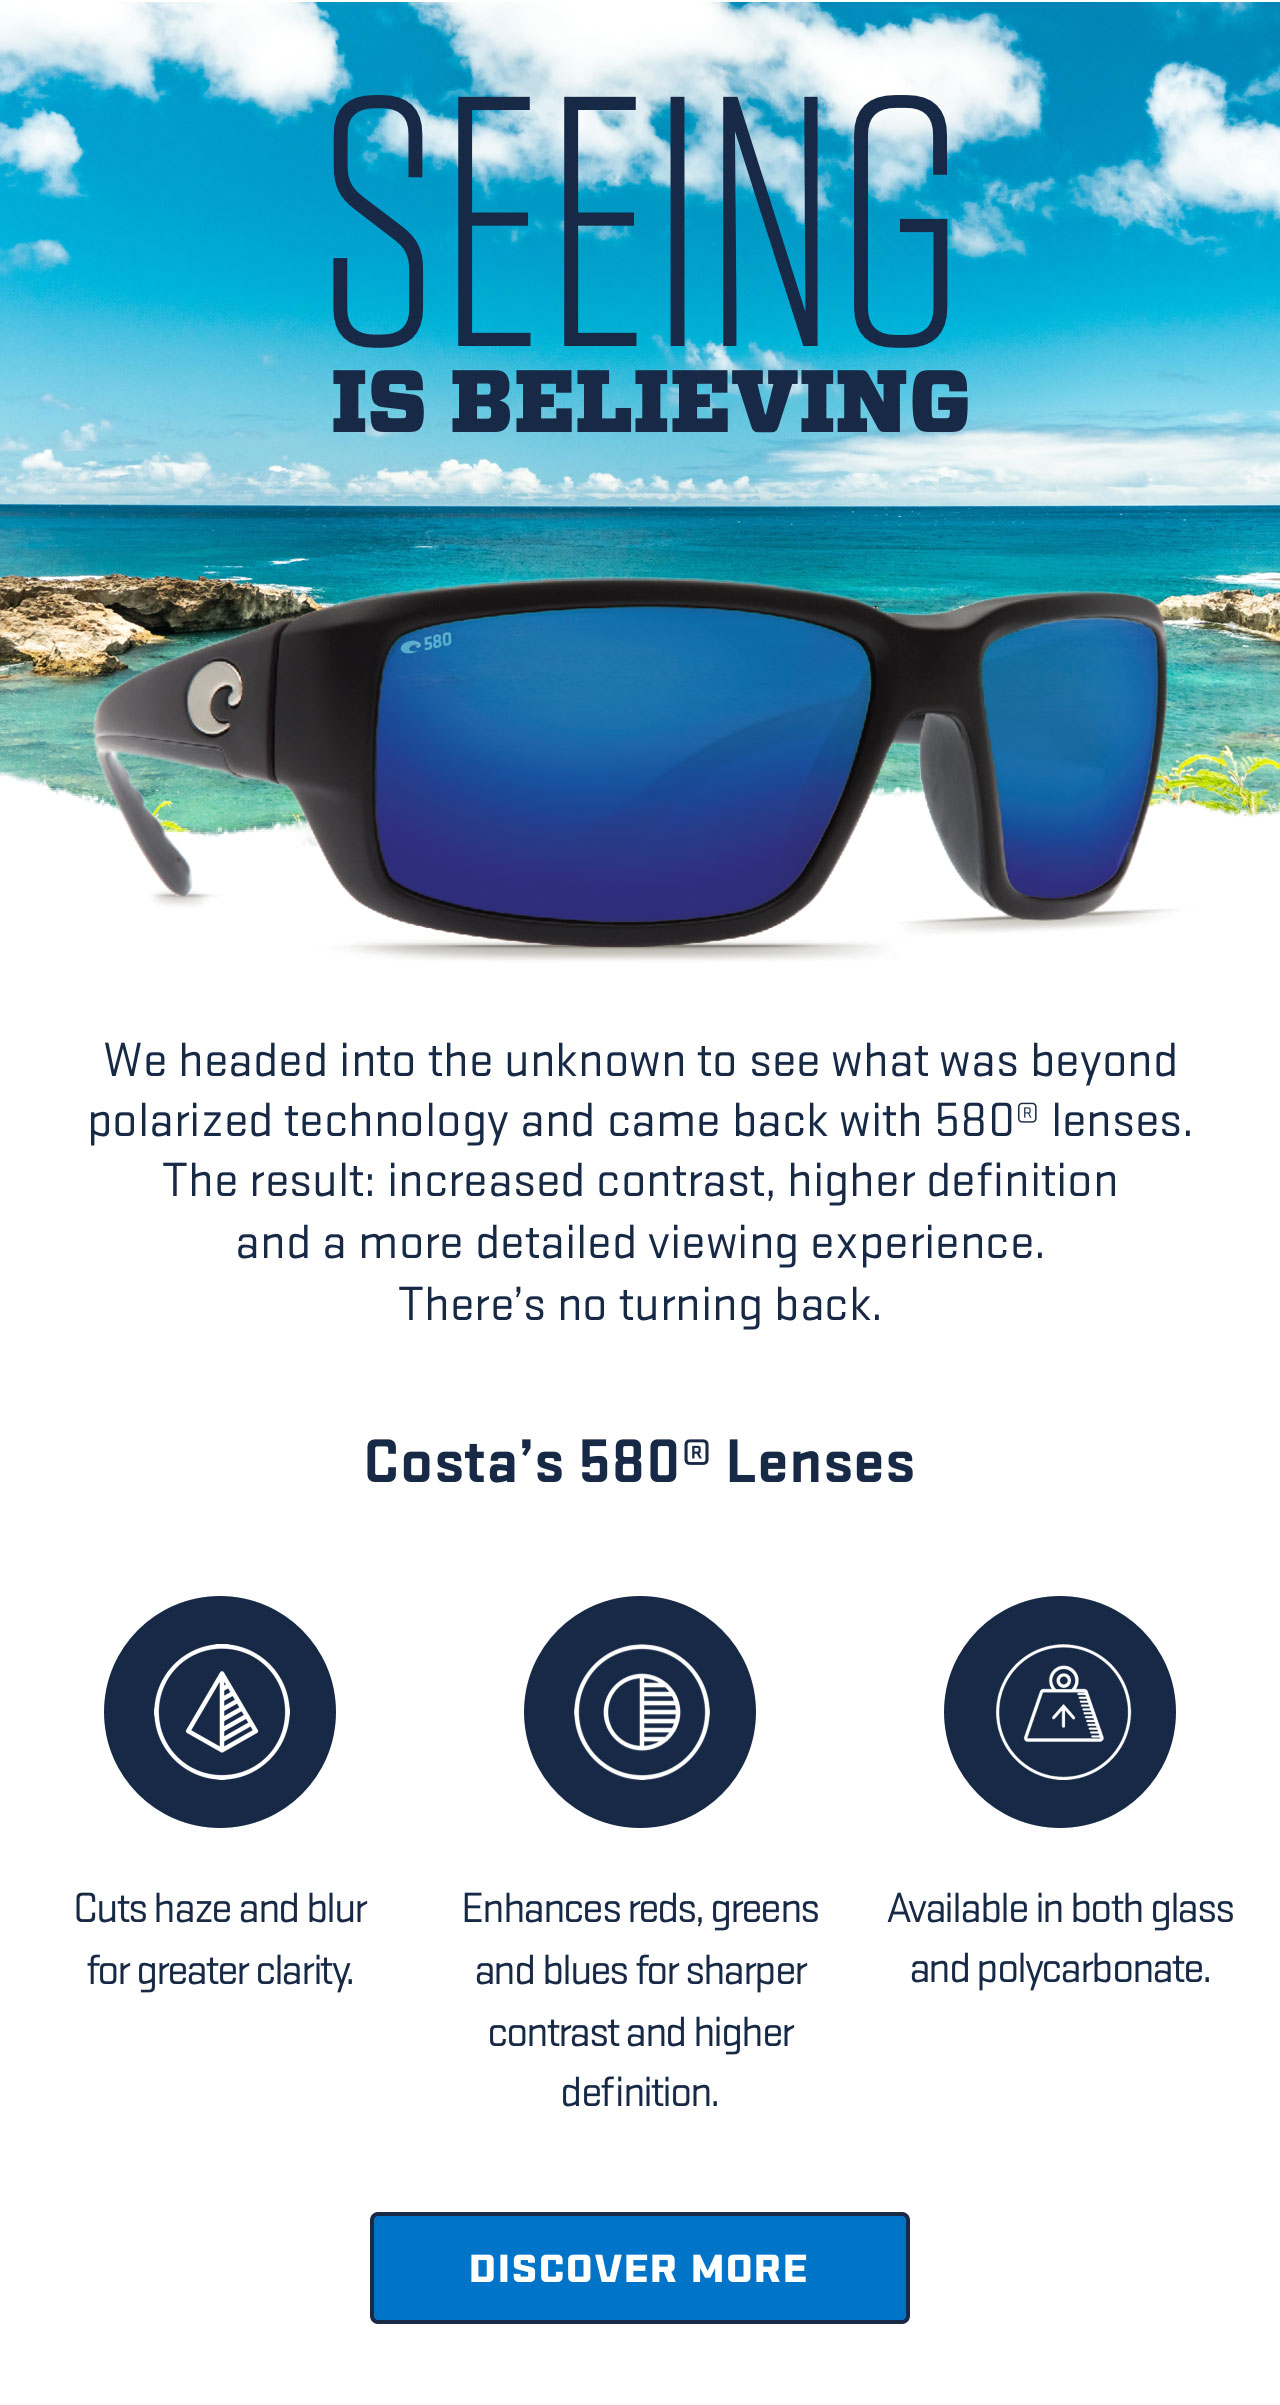 

SEEING IS BELIEVING     

We headed into the unknown to see what was beyond polarized 
technology and came back with 580? lenses. The result: increased 
contrast, higher definition and a more detailed viewing experience.
There's no turning back.

Costa''s 580® Lenses

Cuts haze and blur
for greater clarity.

Enhances reds, greens
and blues for sharper
contrast and higher definition.

Available in both glass 
and polycarbonate.

[ DISCOVER MORE ]



									